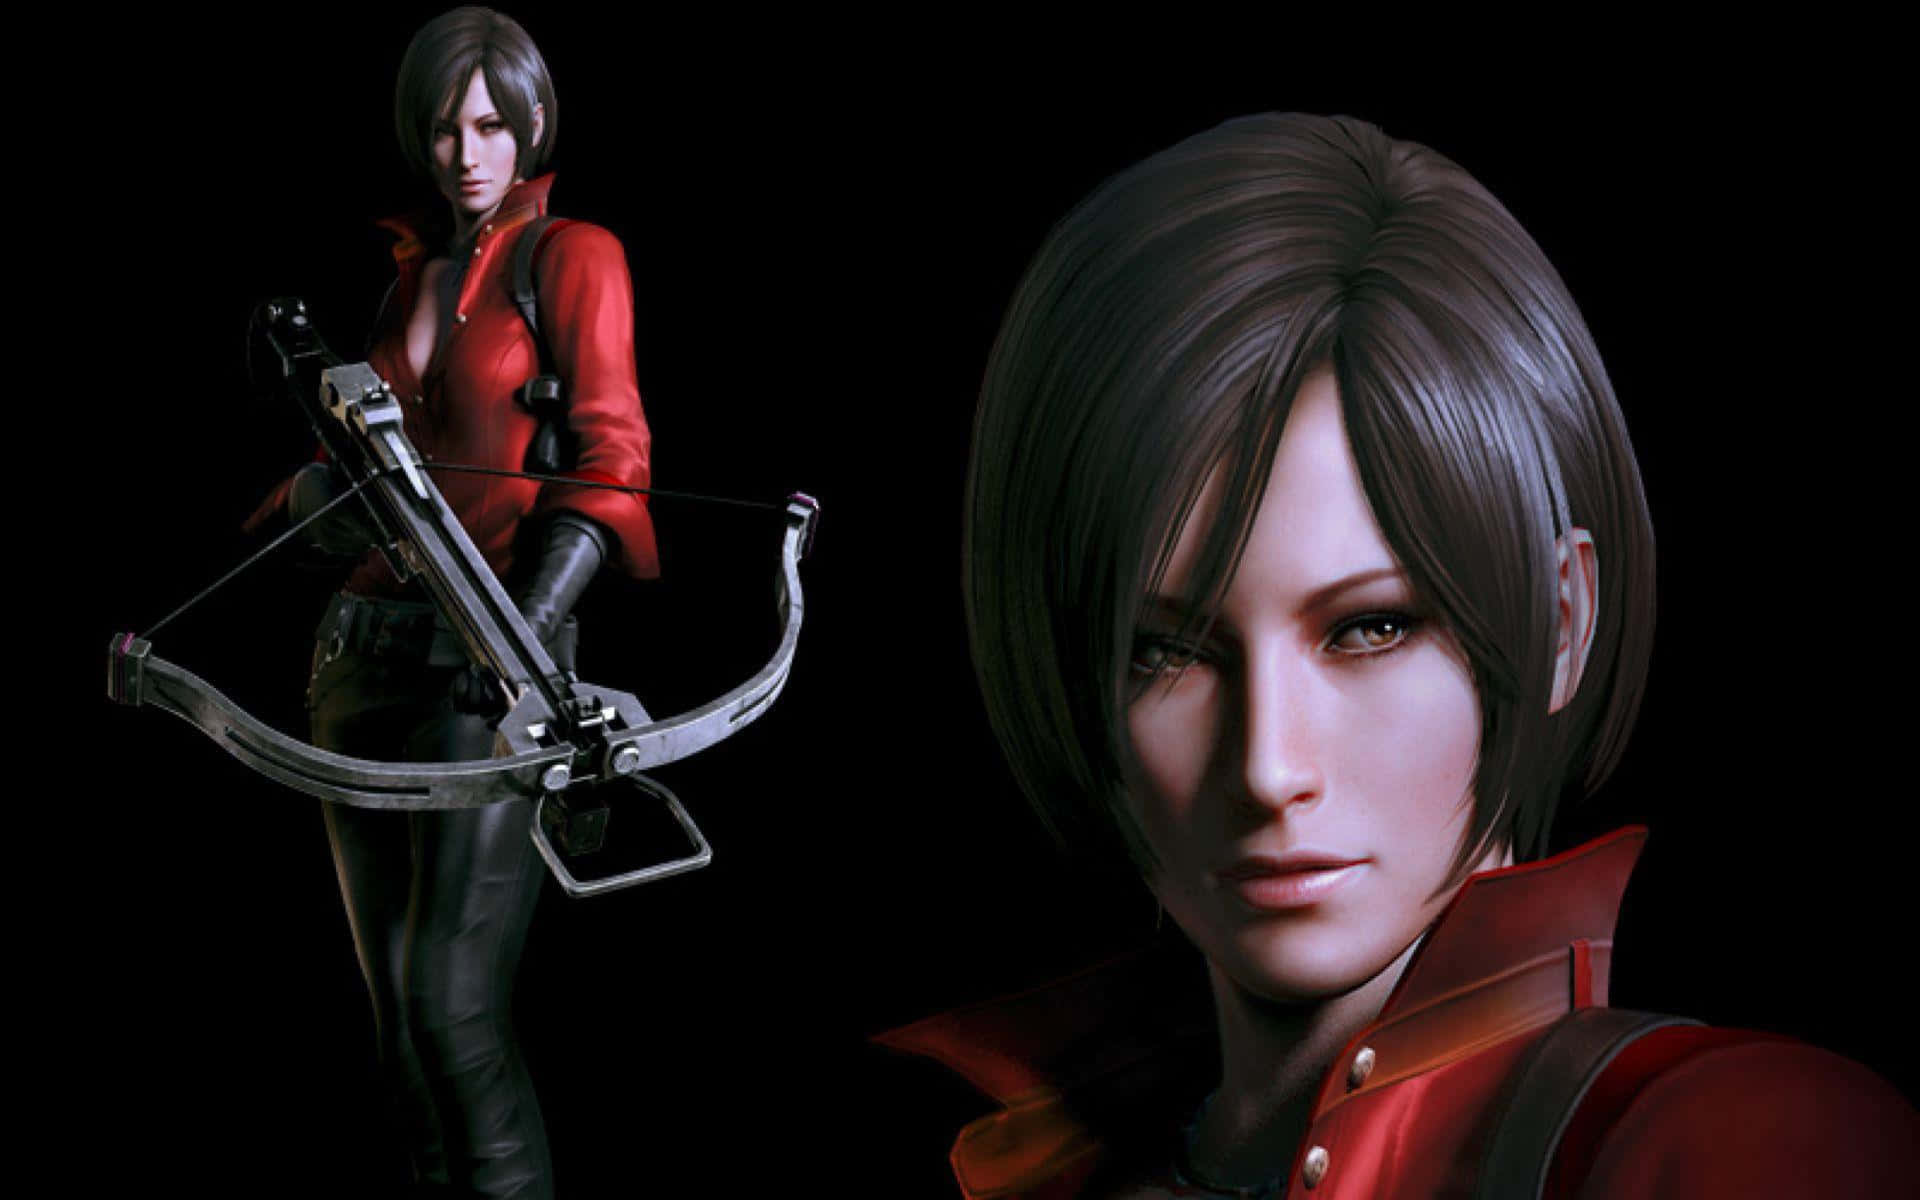 Captivating Beauty Of Ada Wong In Action Wallpaper